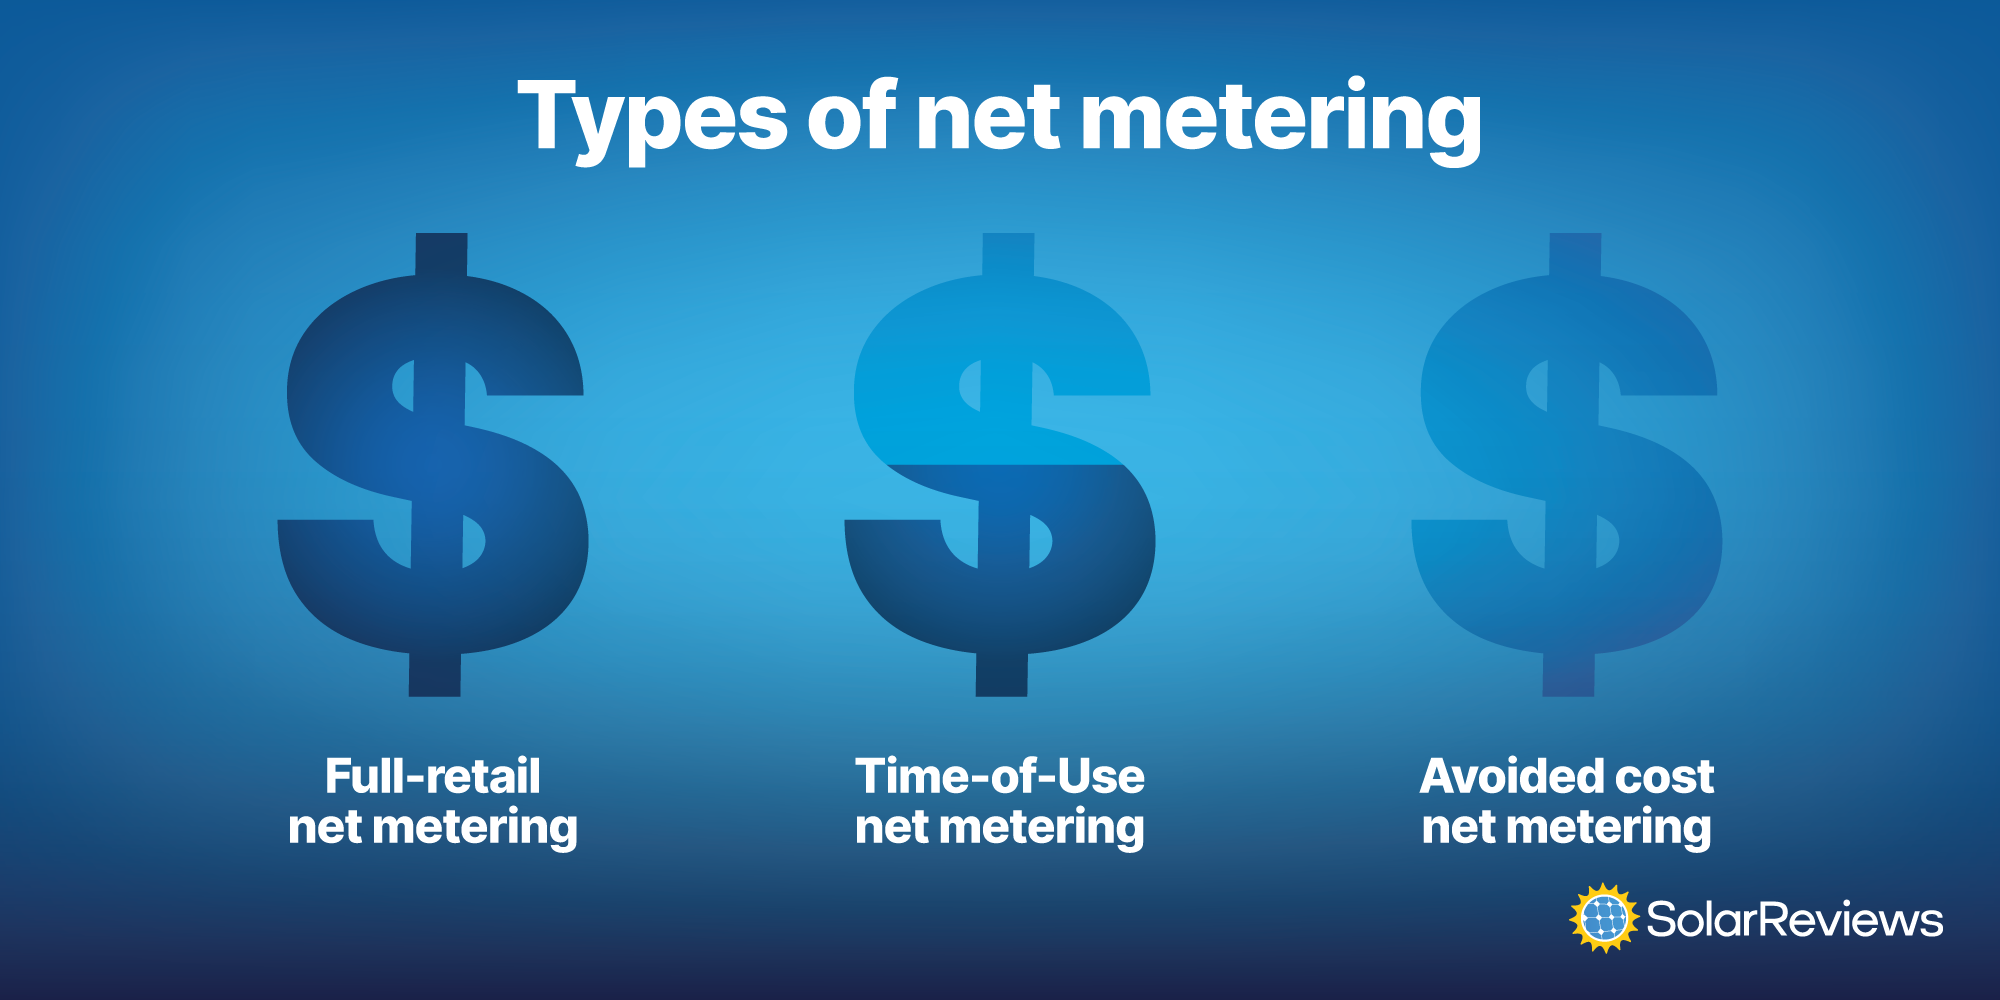 A graphic showing the main three types of net metering: full-retail, time of use, and avoided cost.